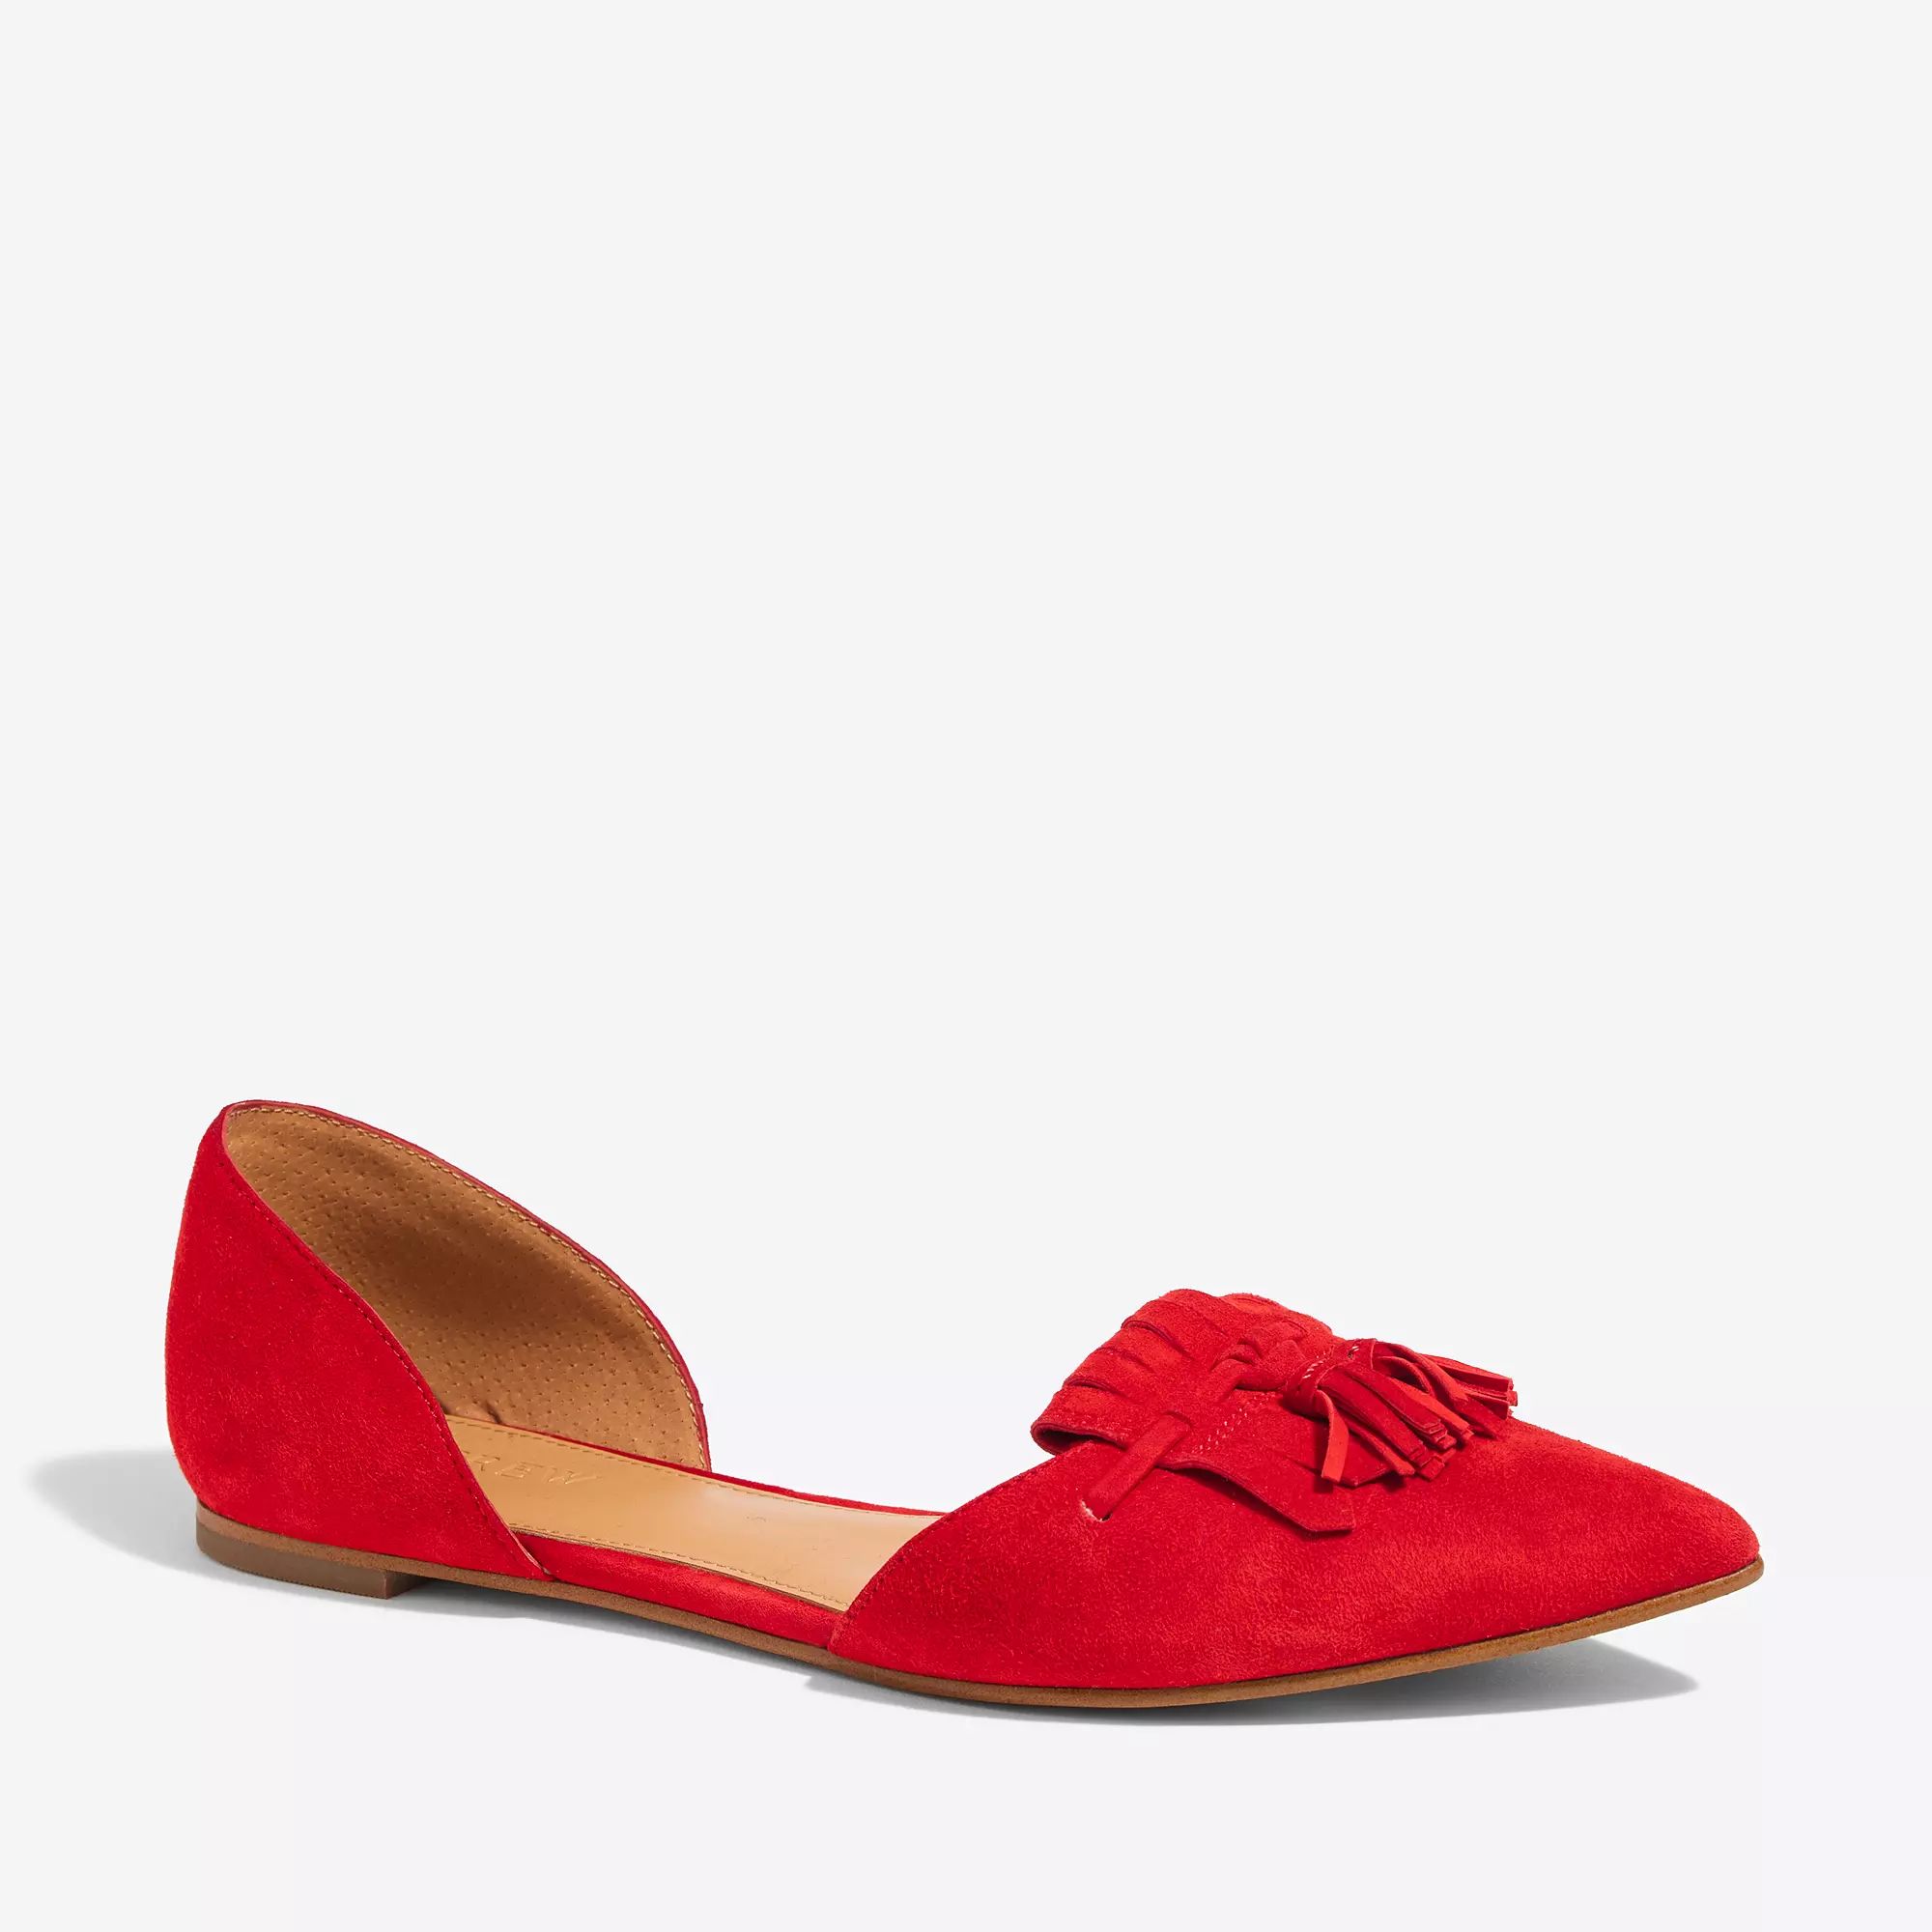 Suede d'Orsay loafer flats | J.Crew Factory